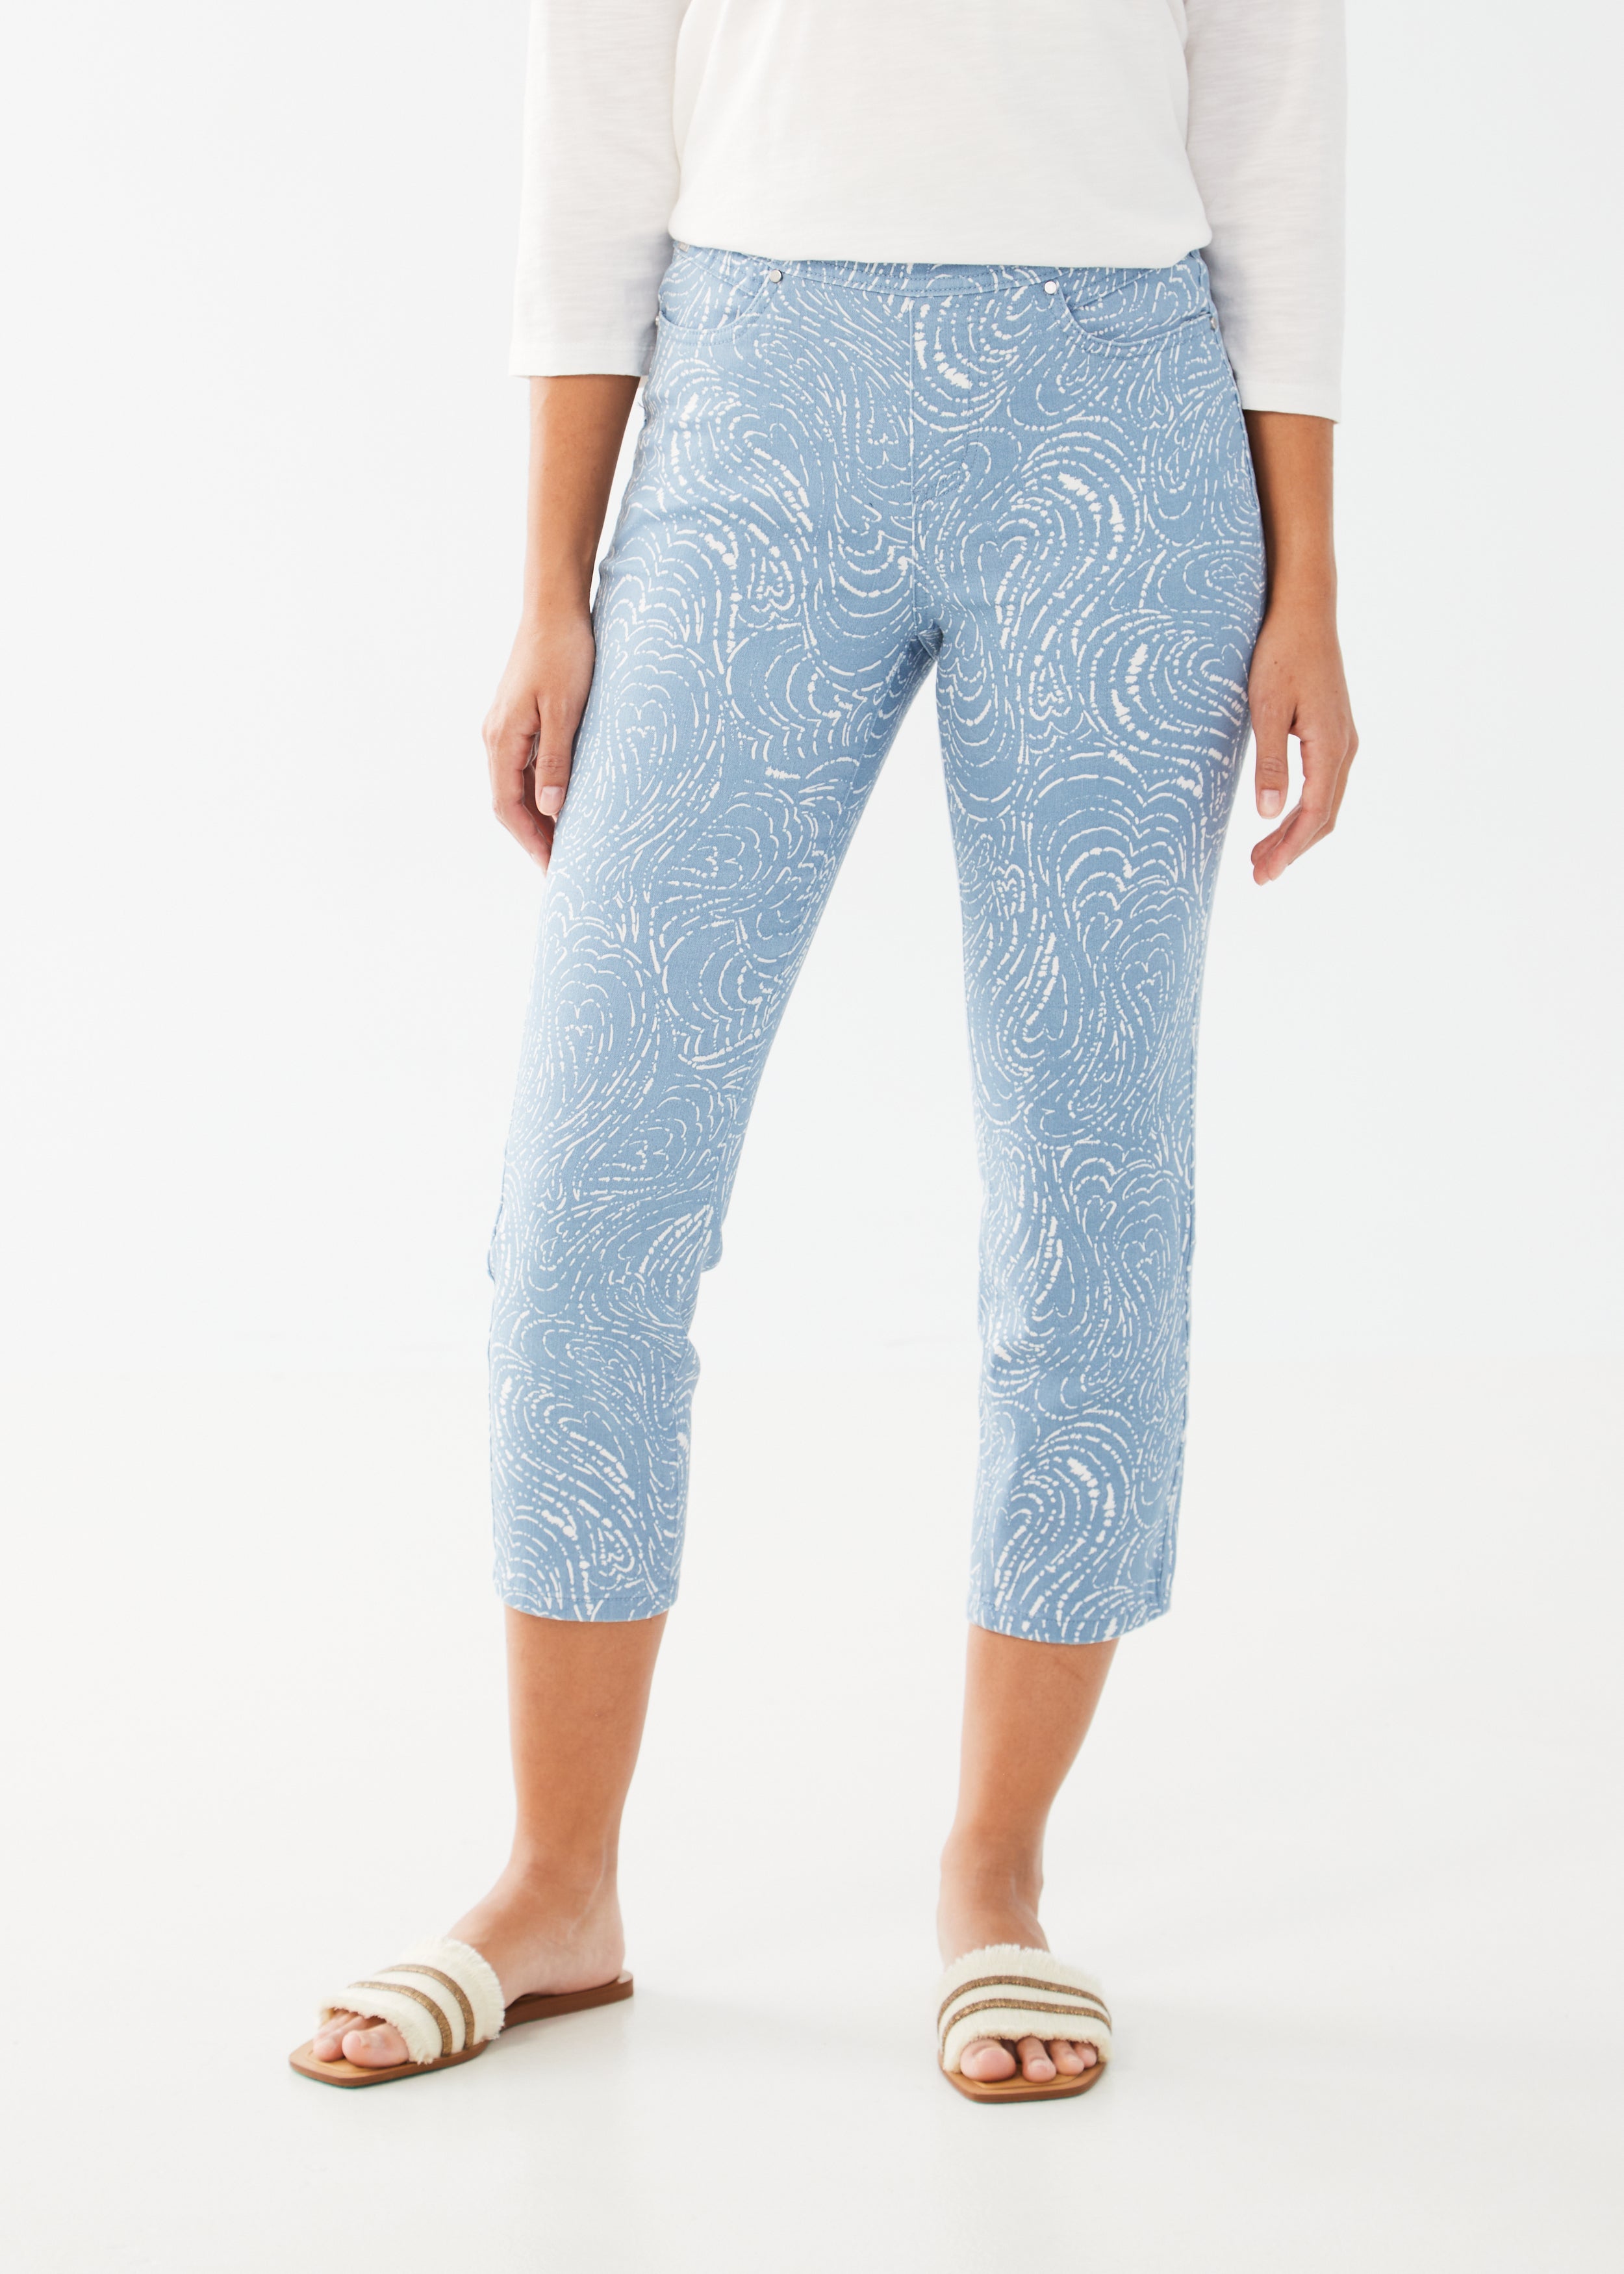 Get ready to make a statement with the FDJ Pull-On Slim Crop Pant! Featuring a striking Trapped Hearts print, these pants are sure to turn heads. Designed with a slim fit and pull-on style, they offer both comfort and style. Elevate your wardrobe with this must-have piece.